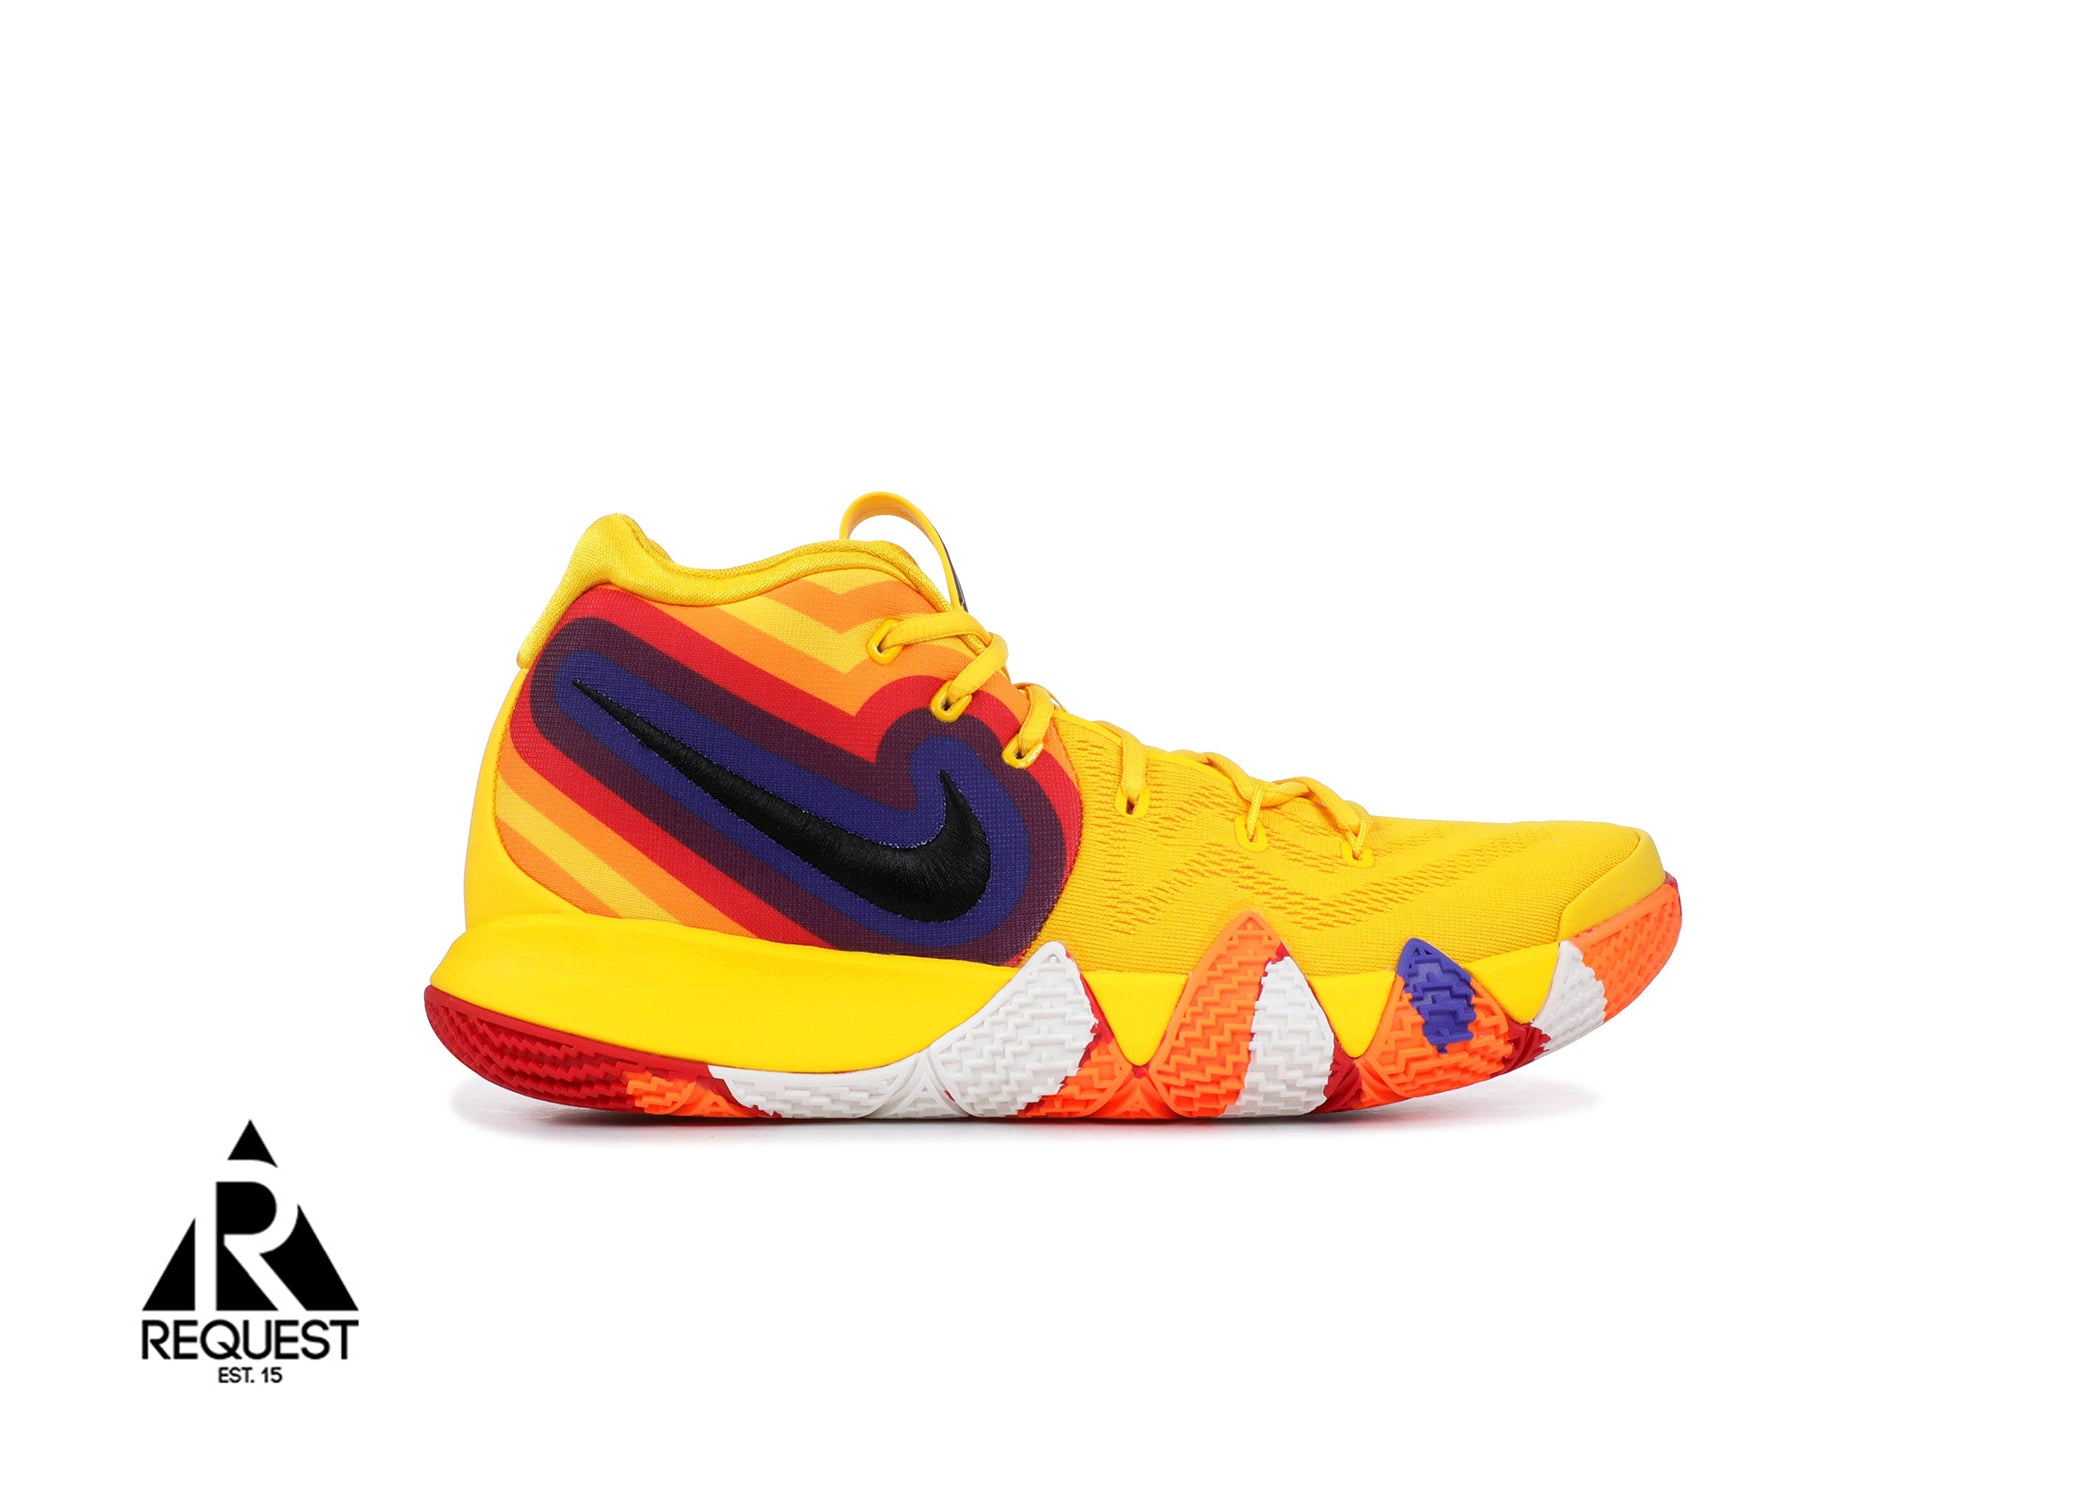 Nike Kyrie 4 “70’s Pack”